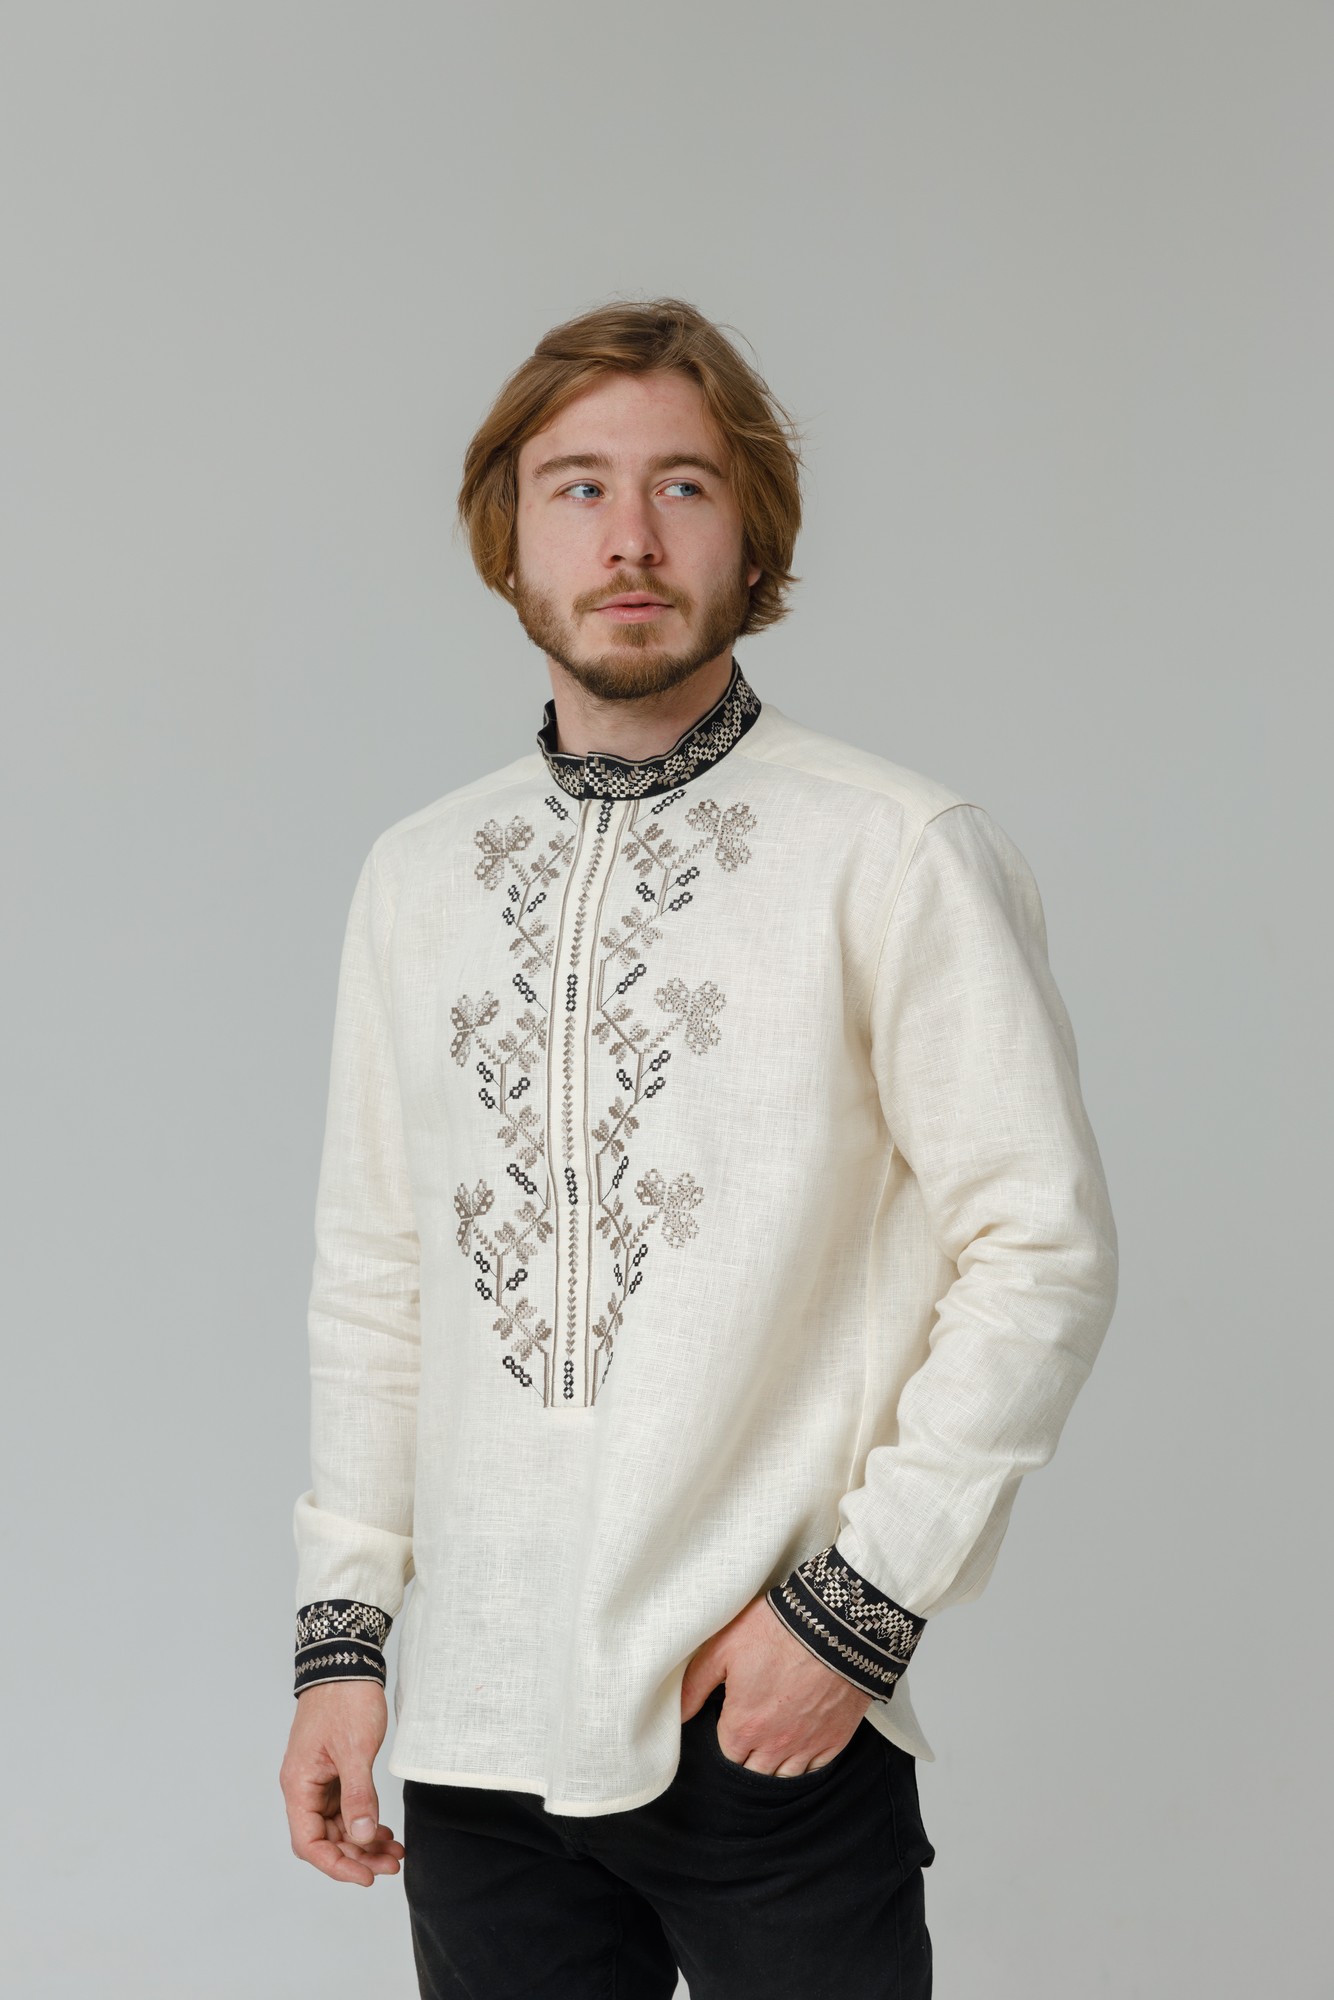 Men's embroidered shirt "Ornament"